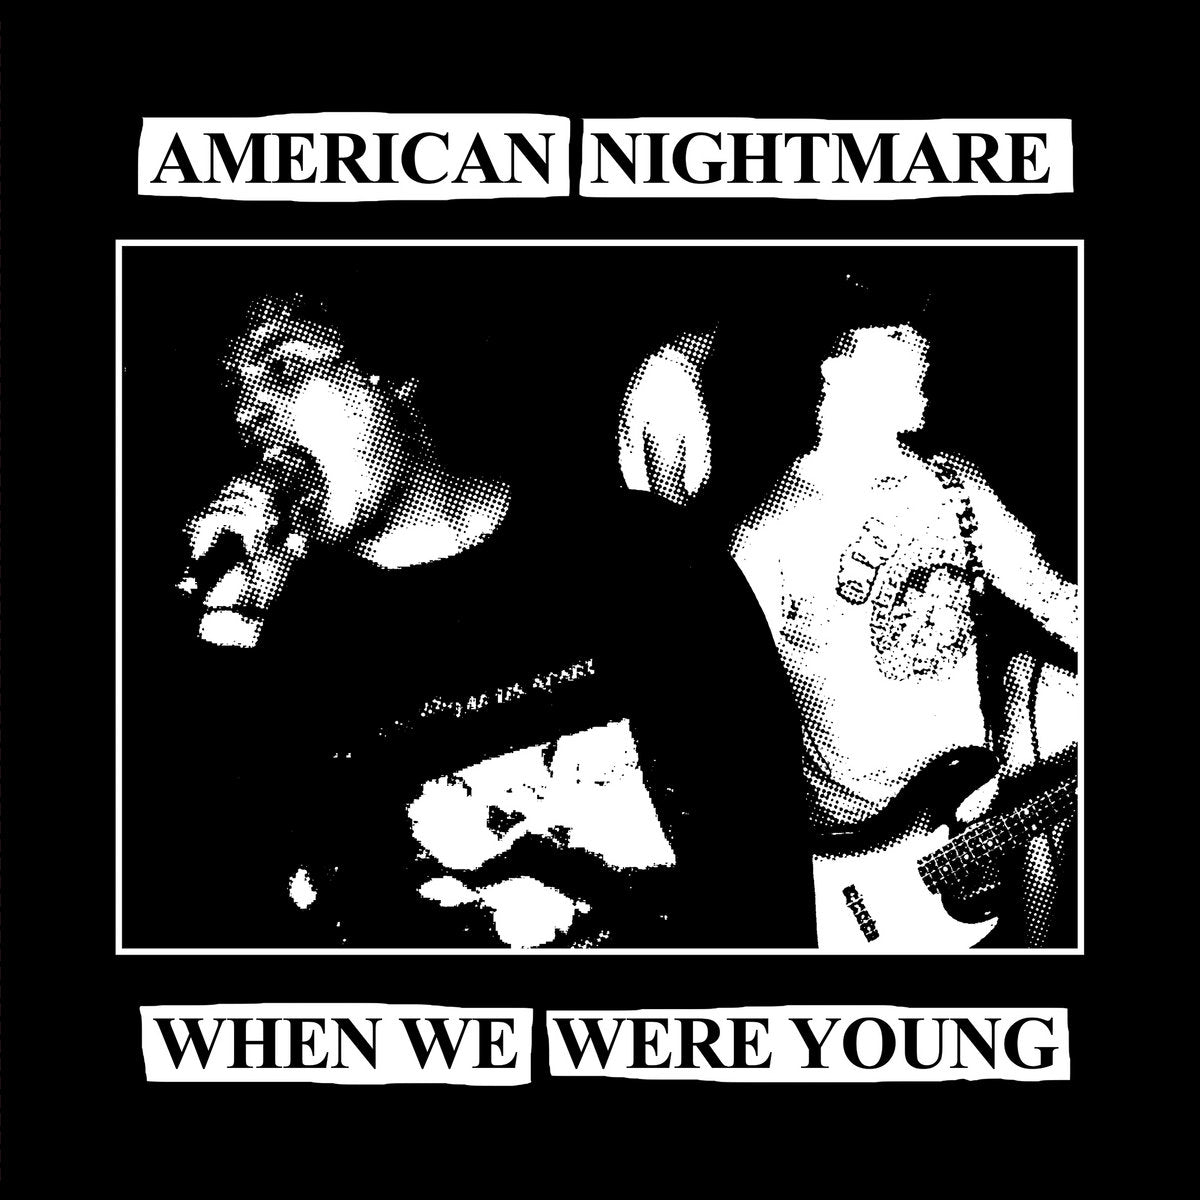 AMERICAN NIGHTMARE 'When We Were Young' 7" / YELLOW EXCLUSIVE EDITION!